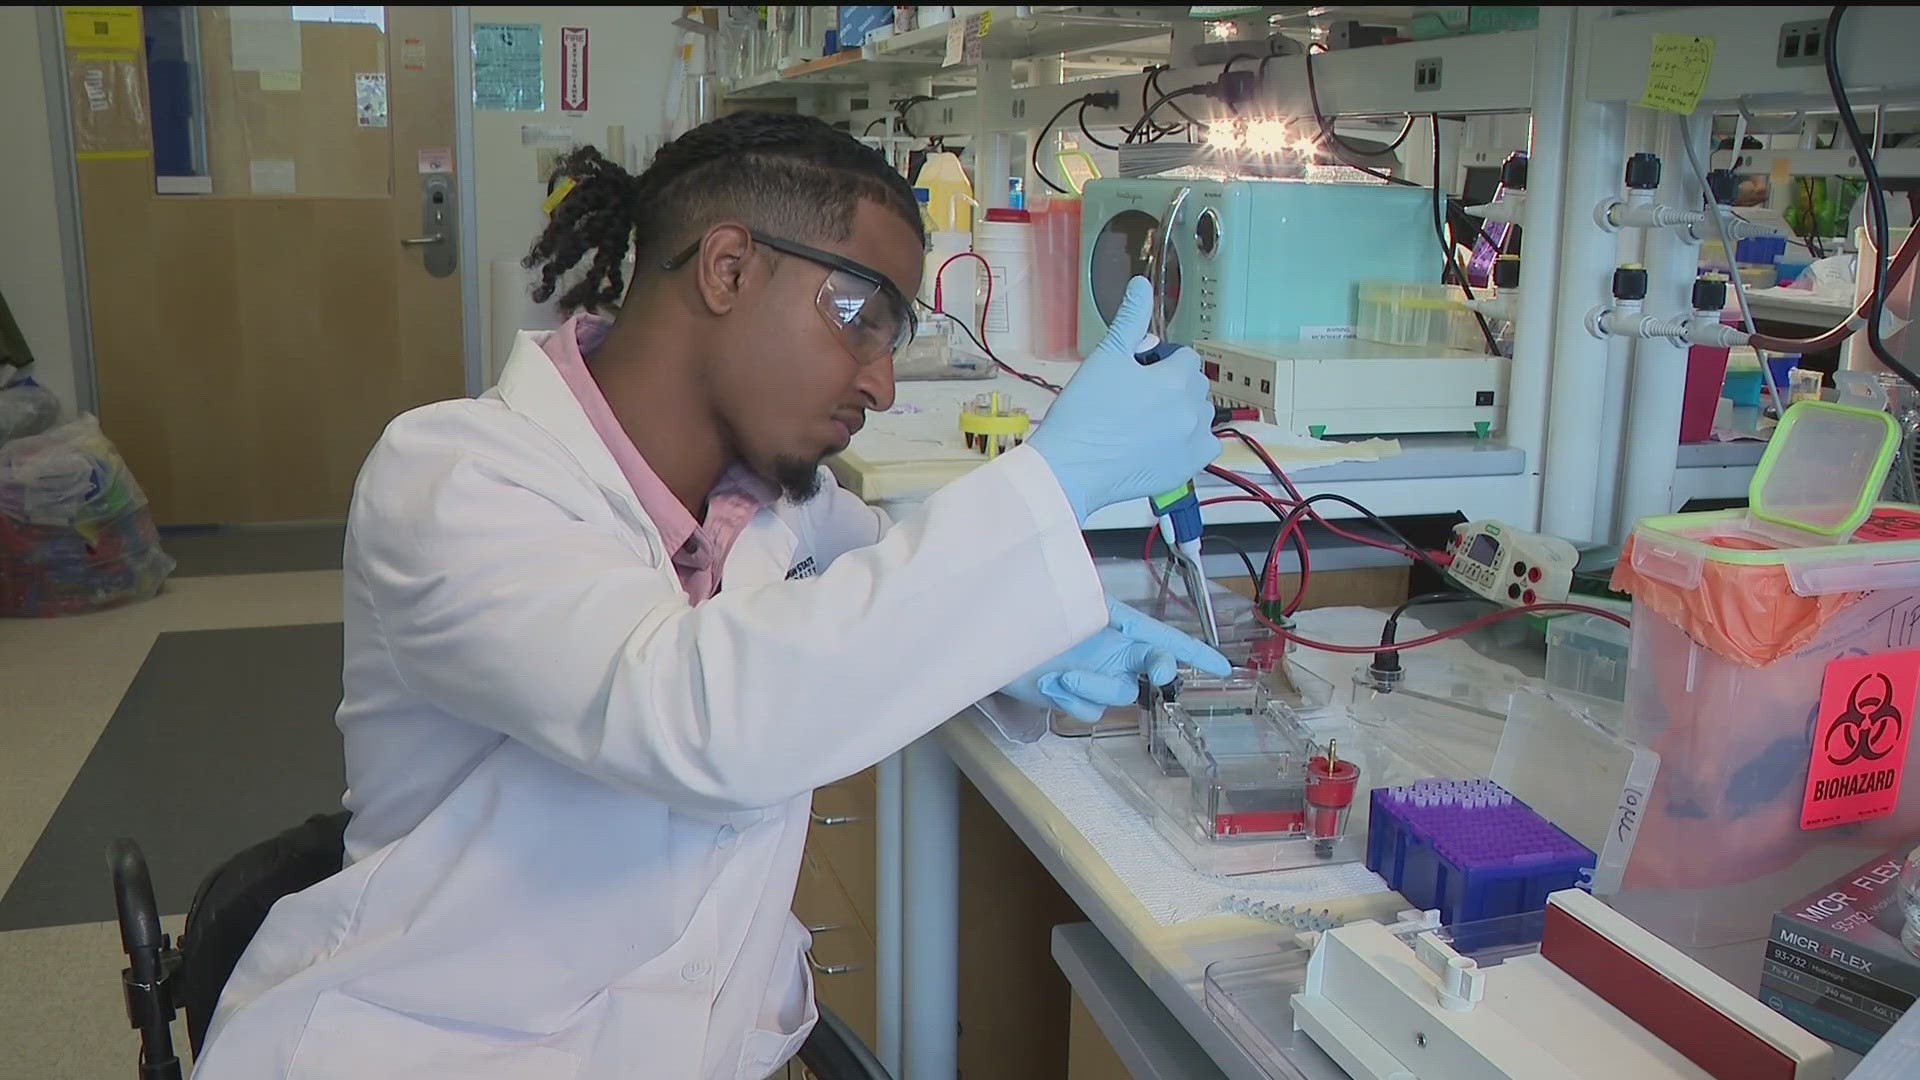 After suffering devastating car accident at just 16 years old, Heru Crooks is determined to find a cure to paralysis.